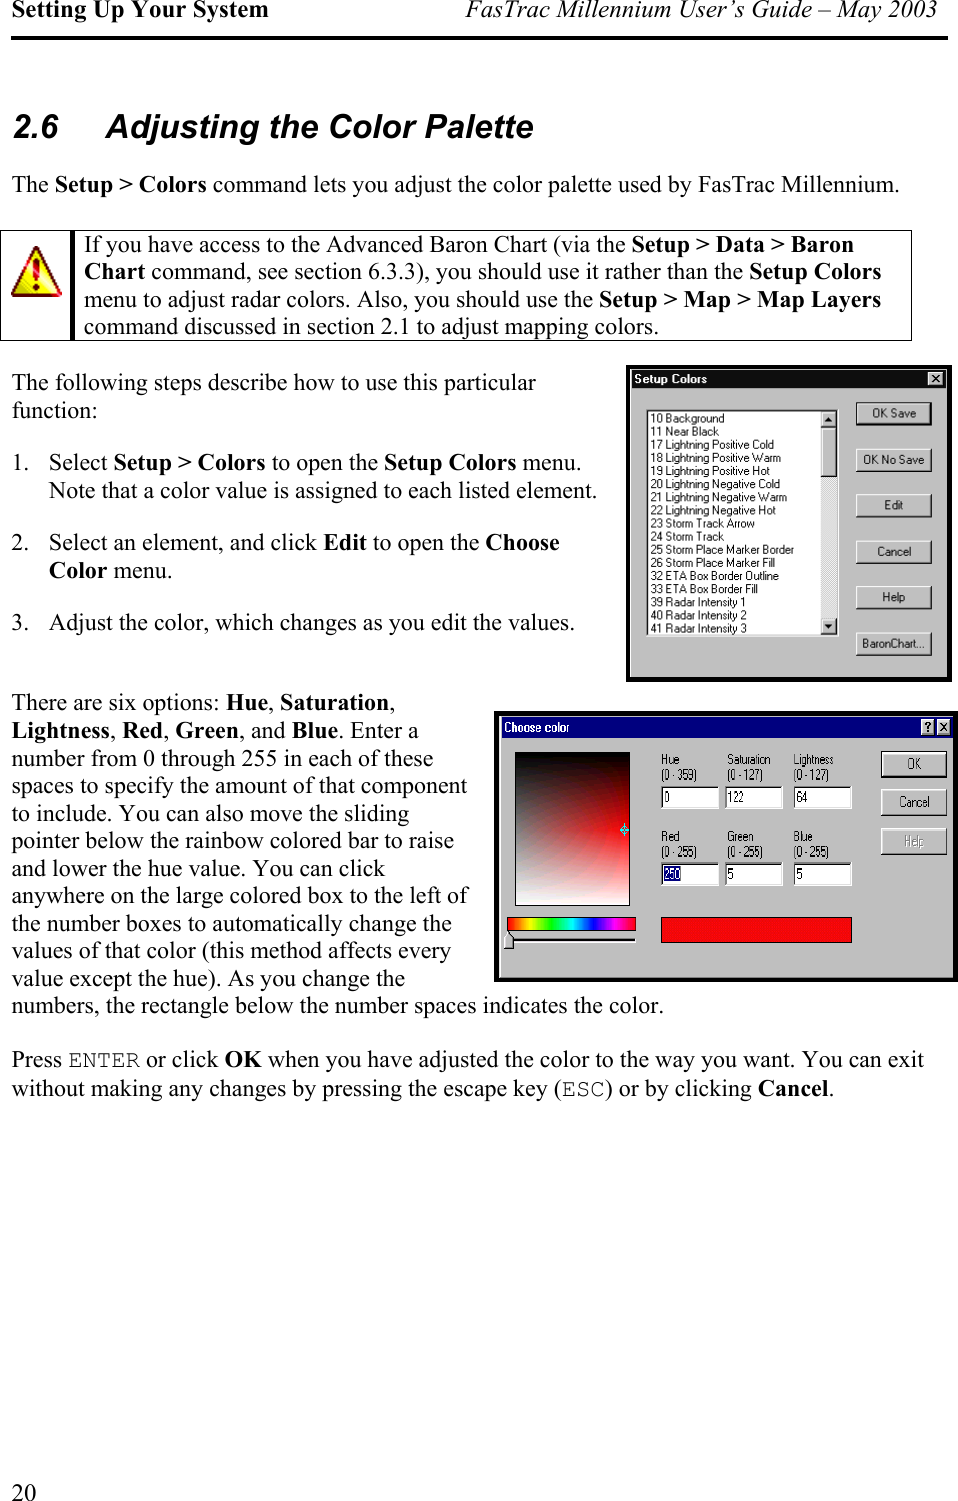 Setting Up Your System  FasTrac Millennium User’s Guide – May 2003 2.6  Adjusting the Color Palette The Setup &gt; Colors command lets you adjust the color palette used by FasTrac Millennium.   If you have access to the Advanced Baron Chart (via the Setup &gt; Data &gt; Baron Chart command, see section 6.3.3), you should use it rather than the Setup Colors menu to adjust radar colors. Also, you should use the Setup &gt; Map &gt; Map Layers command discussed in section 2.1 to adjust mapping colors. The following steps describe how to use this particular function: 1. Select Setup &gt; Colors to open the Setup Colors menu. Note that a color value is assigned to each listed element. 2.  Select an element, and click Edit to open the Choose Color menu. 3.  Adjust the color, which changes as you edit the values.  There are six options: Hue, Saturation, Lightness, Red, Green, and Blue. Enter a number from 0 through 255 in each of these spaces to specify the amount of that component to include. You can also move the sliding pointer below the rainbow colored bar to raise and lower the hue value. You can click anywhere on the large colored box to the left of the number boxes to automatically change the values of that color (this method affects every value except the hue). As you change the numbers, the rectangle below the number spaces indicates the color. Press ENTER or click OK when you have adjusted the color to the way you want. You can exit without making any changes by pressing the escape key (ESC) or by clicking Cancel. 20 